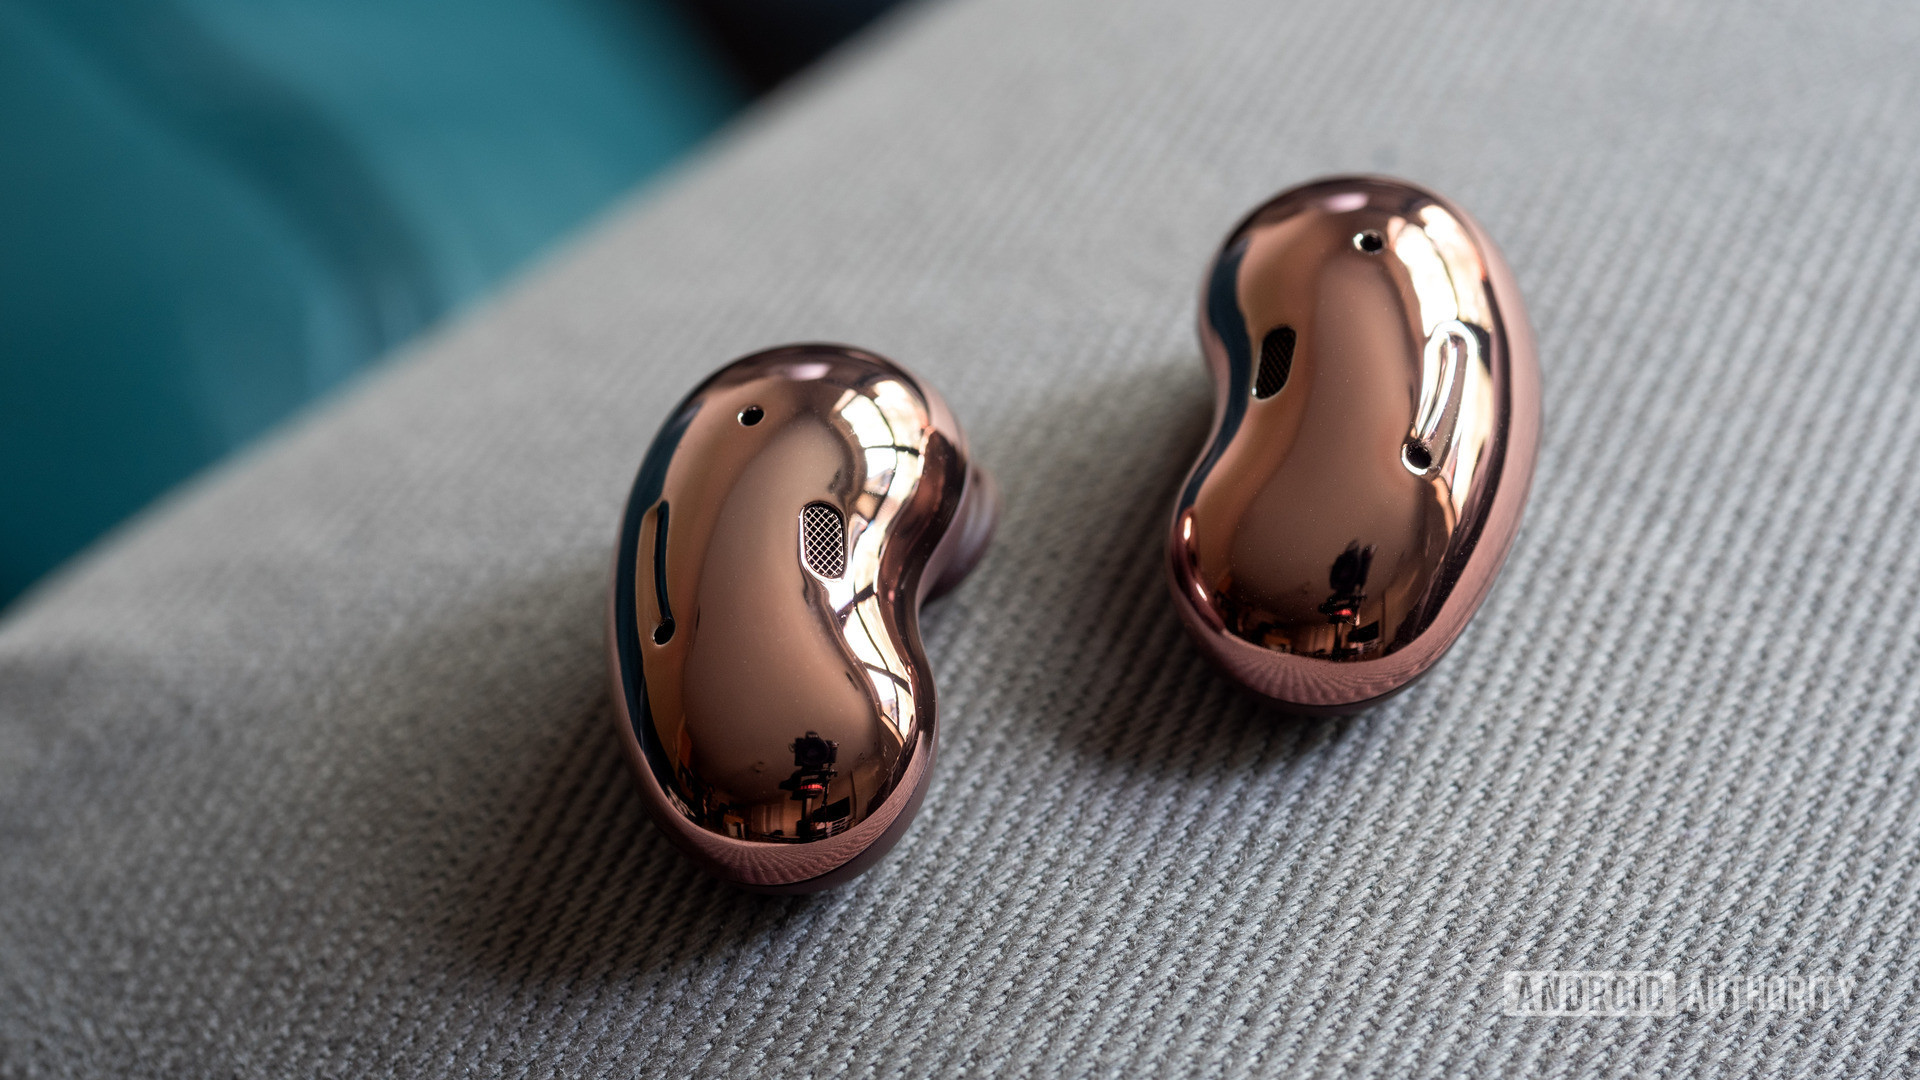 A picture of the Samsung Galaxy Buds Live noise cancelling true wireless earbuds bean shaped, reflective exteriors.